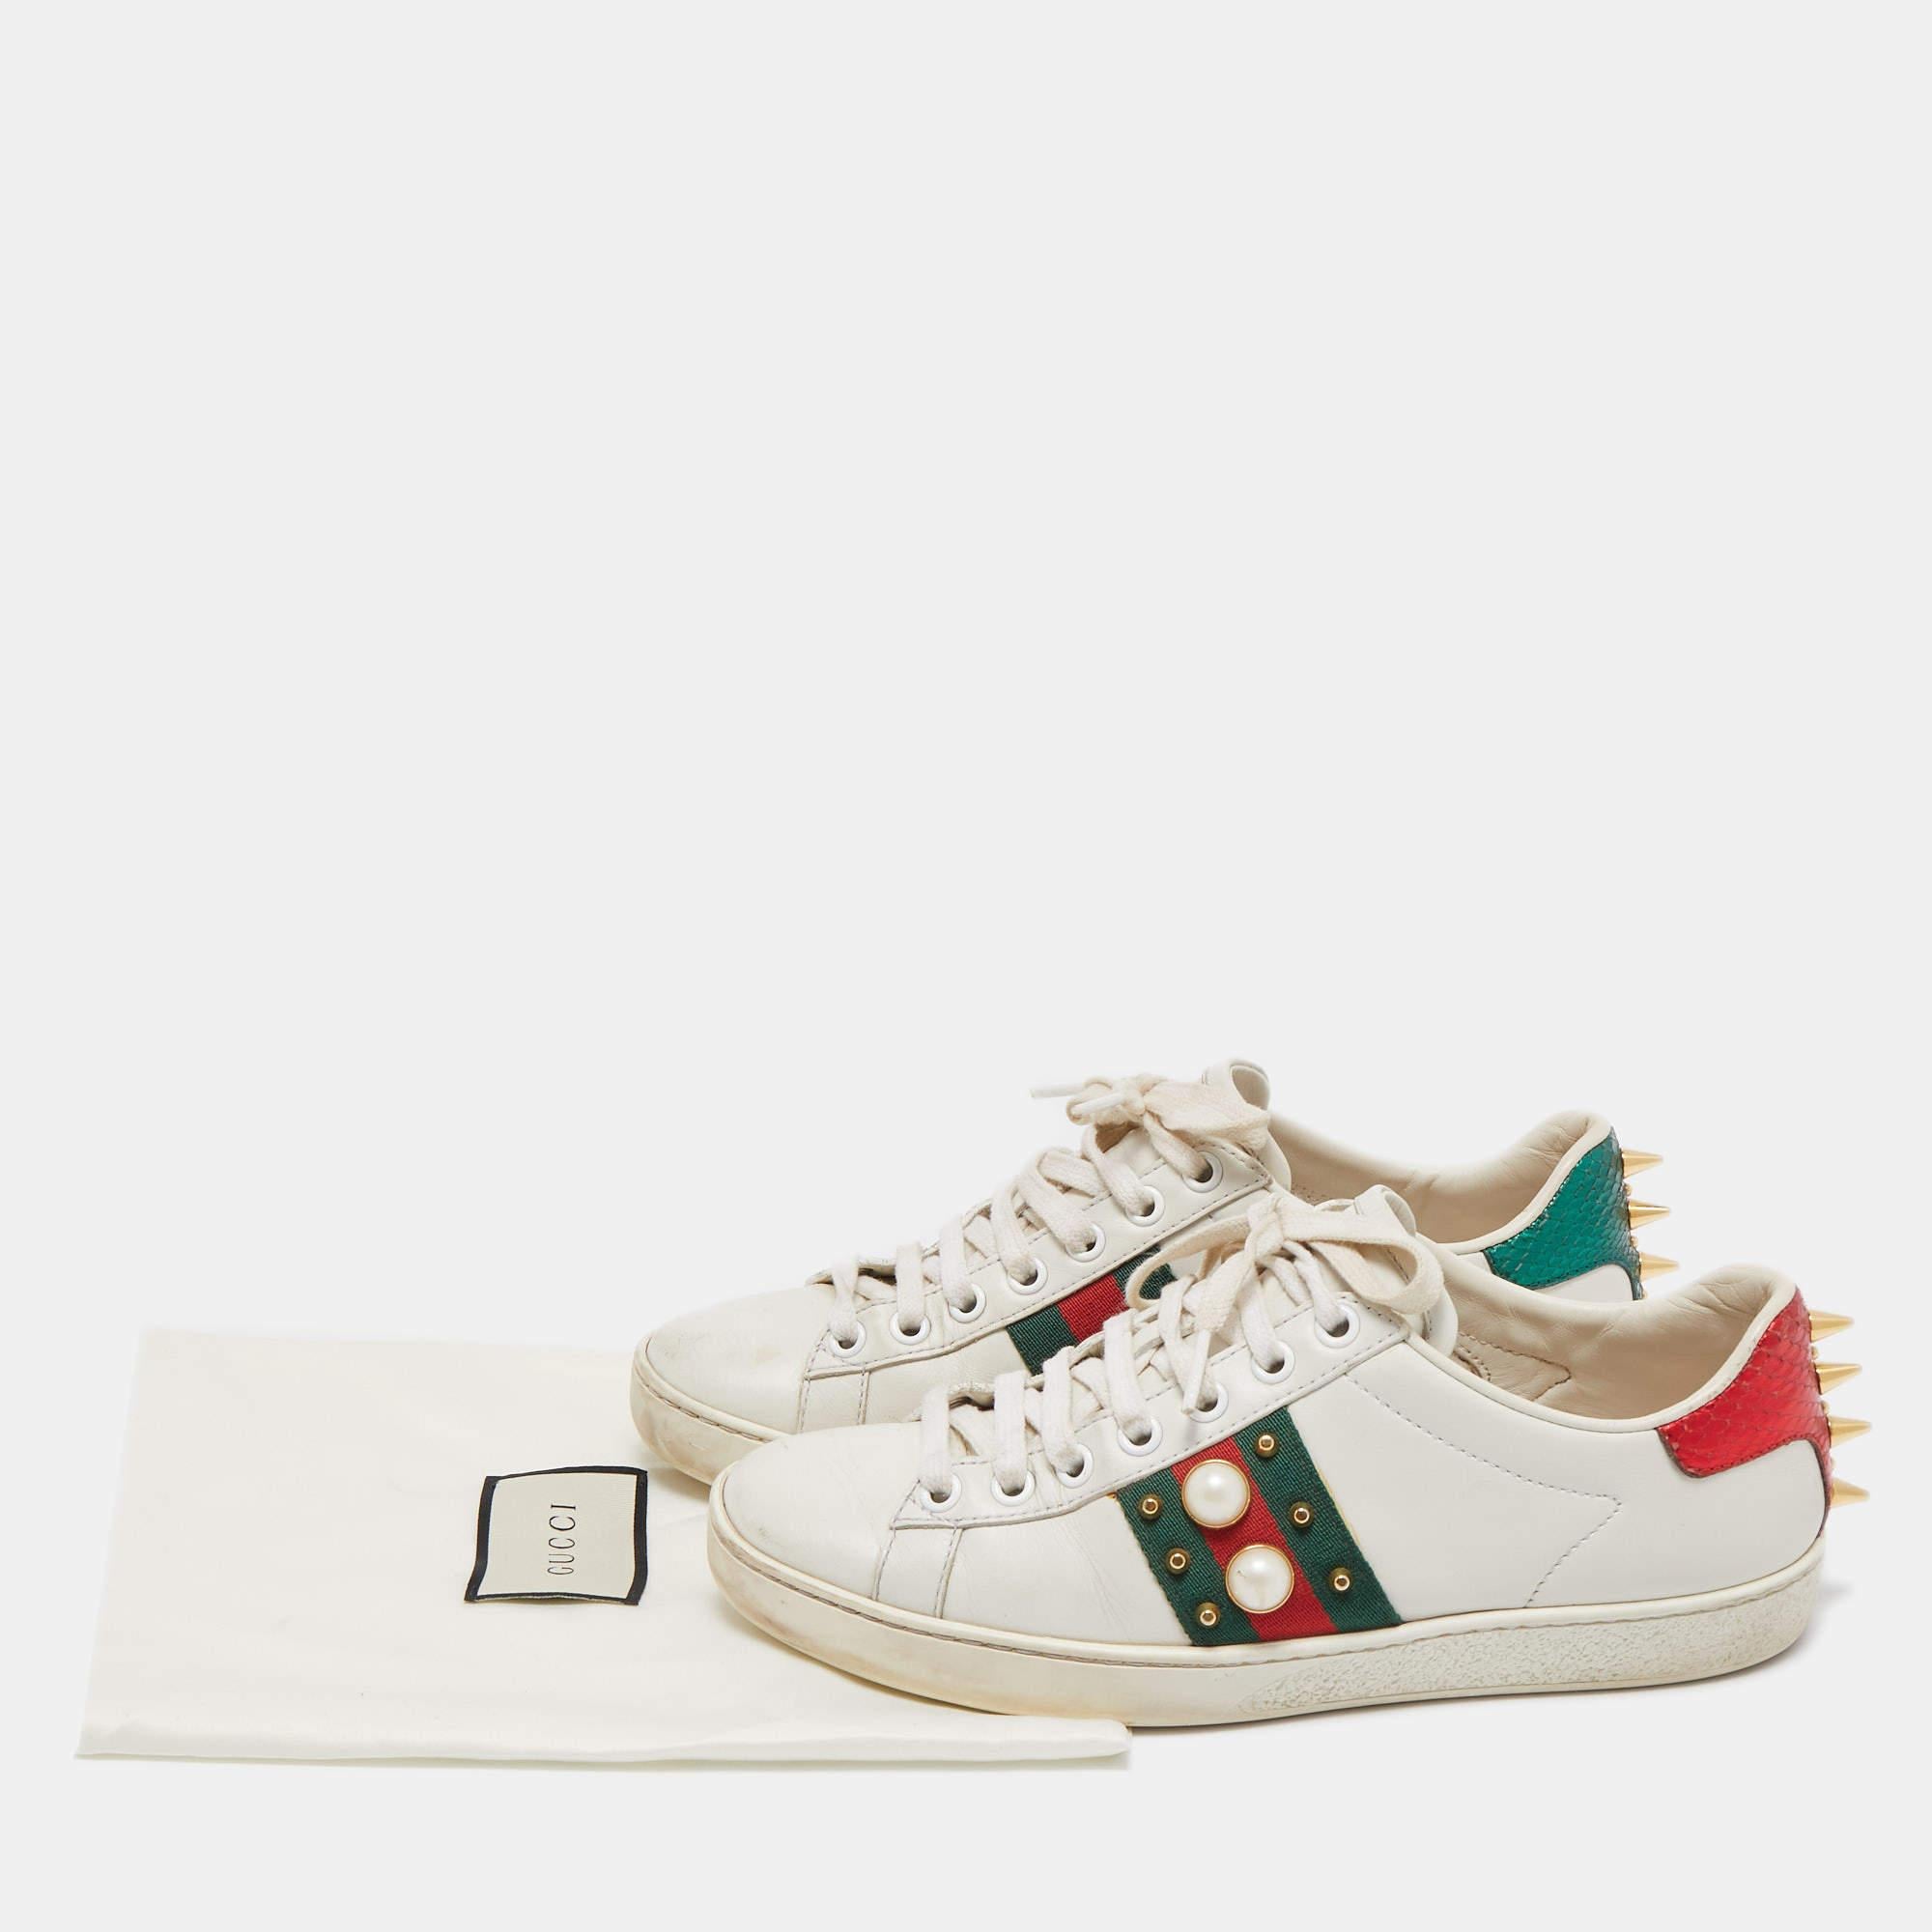 Gucci White Leather Pearl Embellished and Studded Ace Sneakers Size 35 5